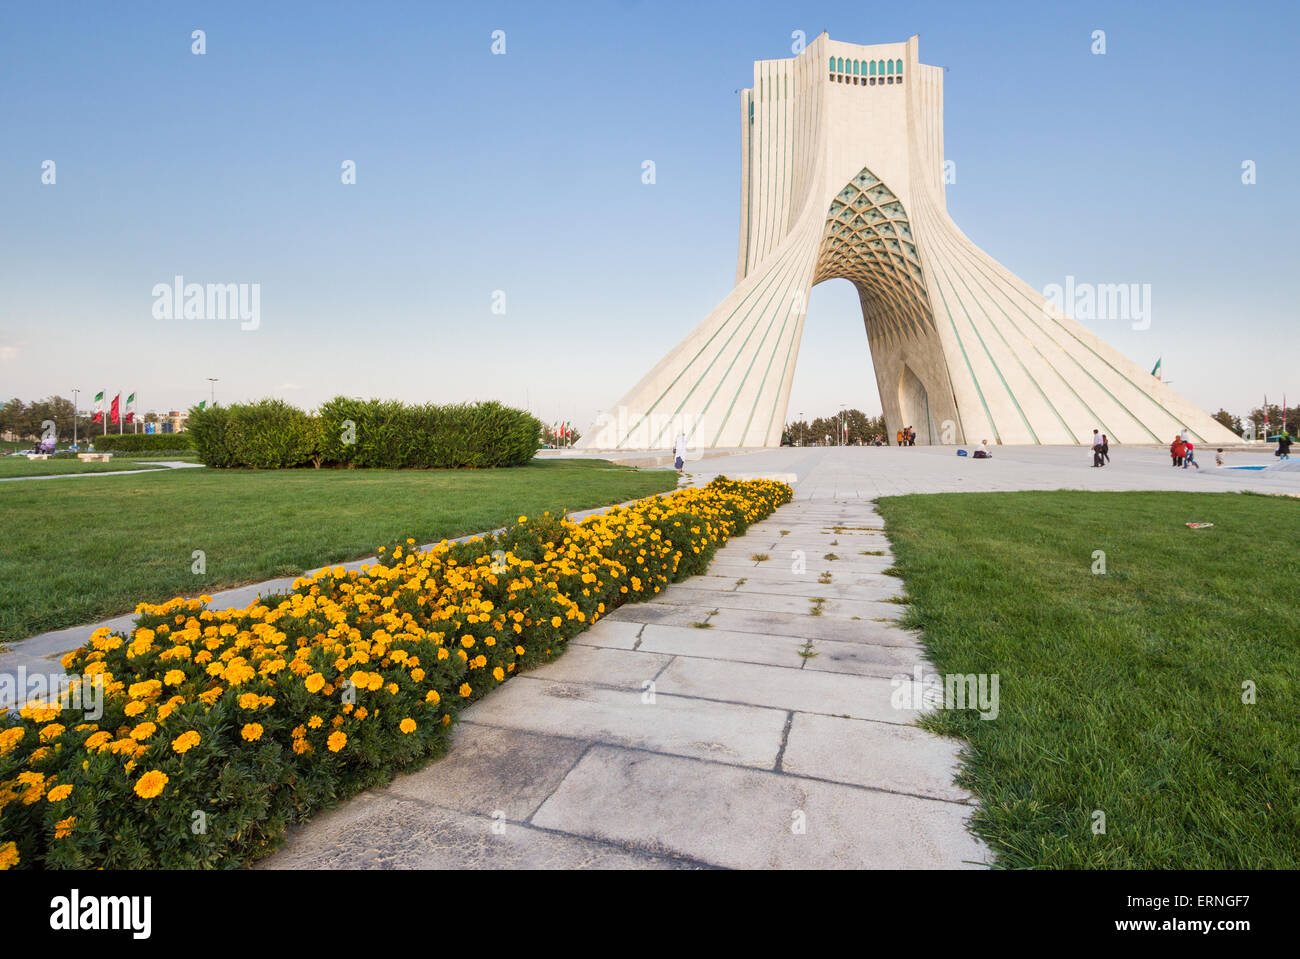 Azadi tower, the Freedom Tower, one of the symbols of Tehran Stock Photo